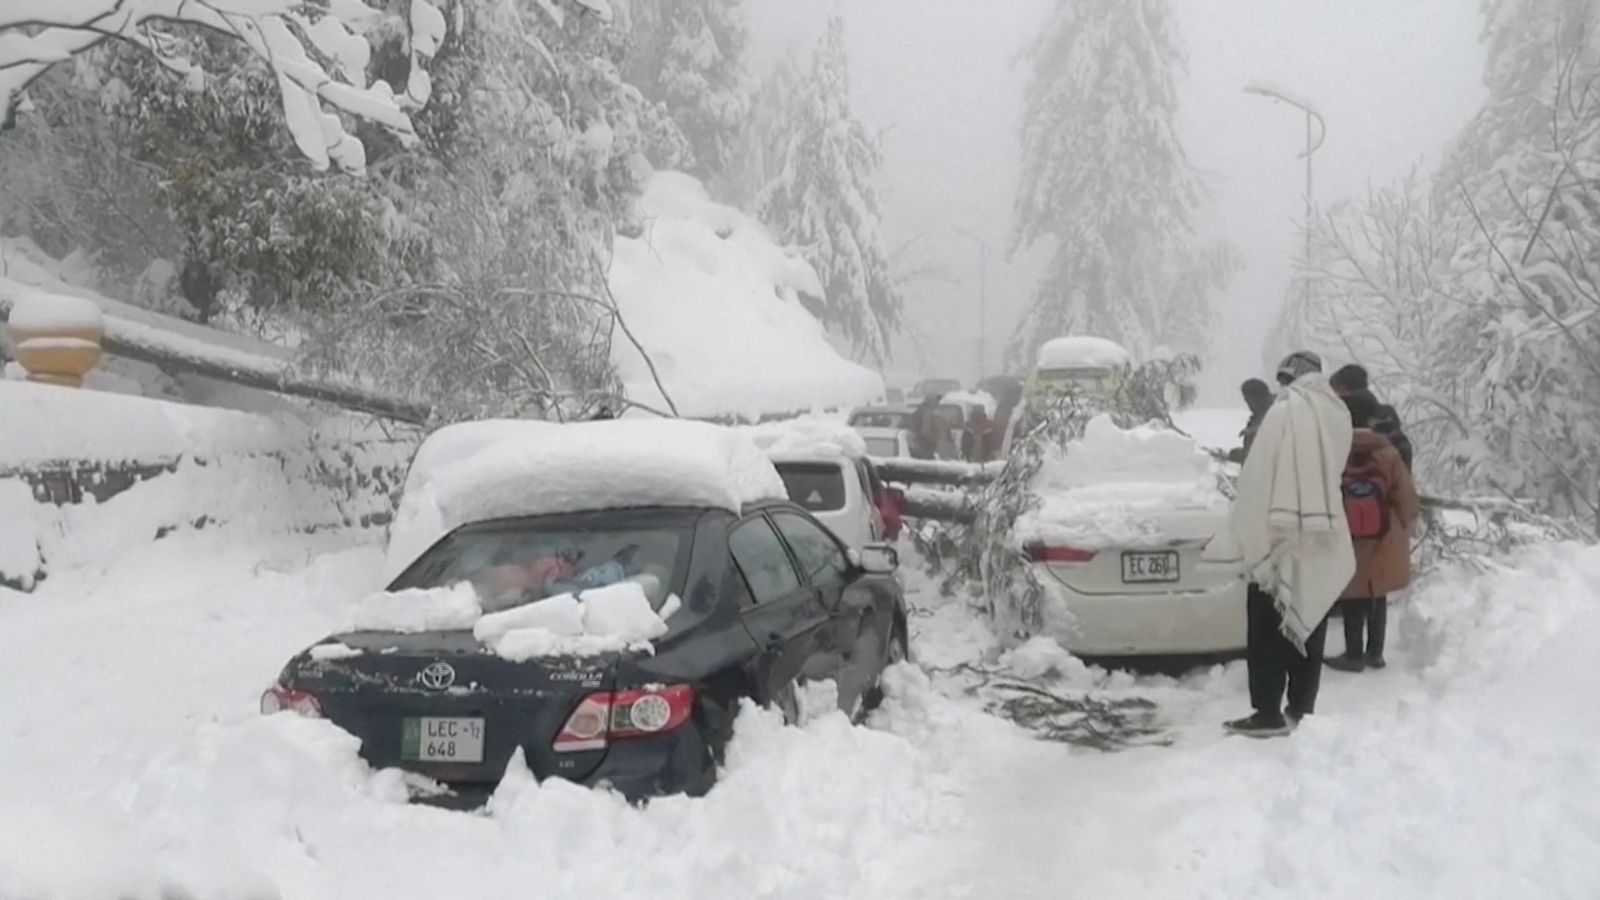 About 22 People Dead After Cars Got Stuck At Pakistan Mountain Resort